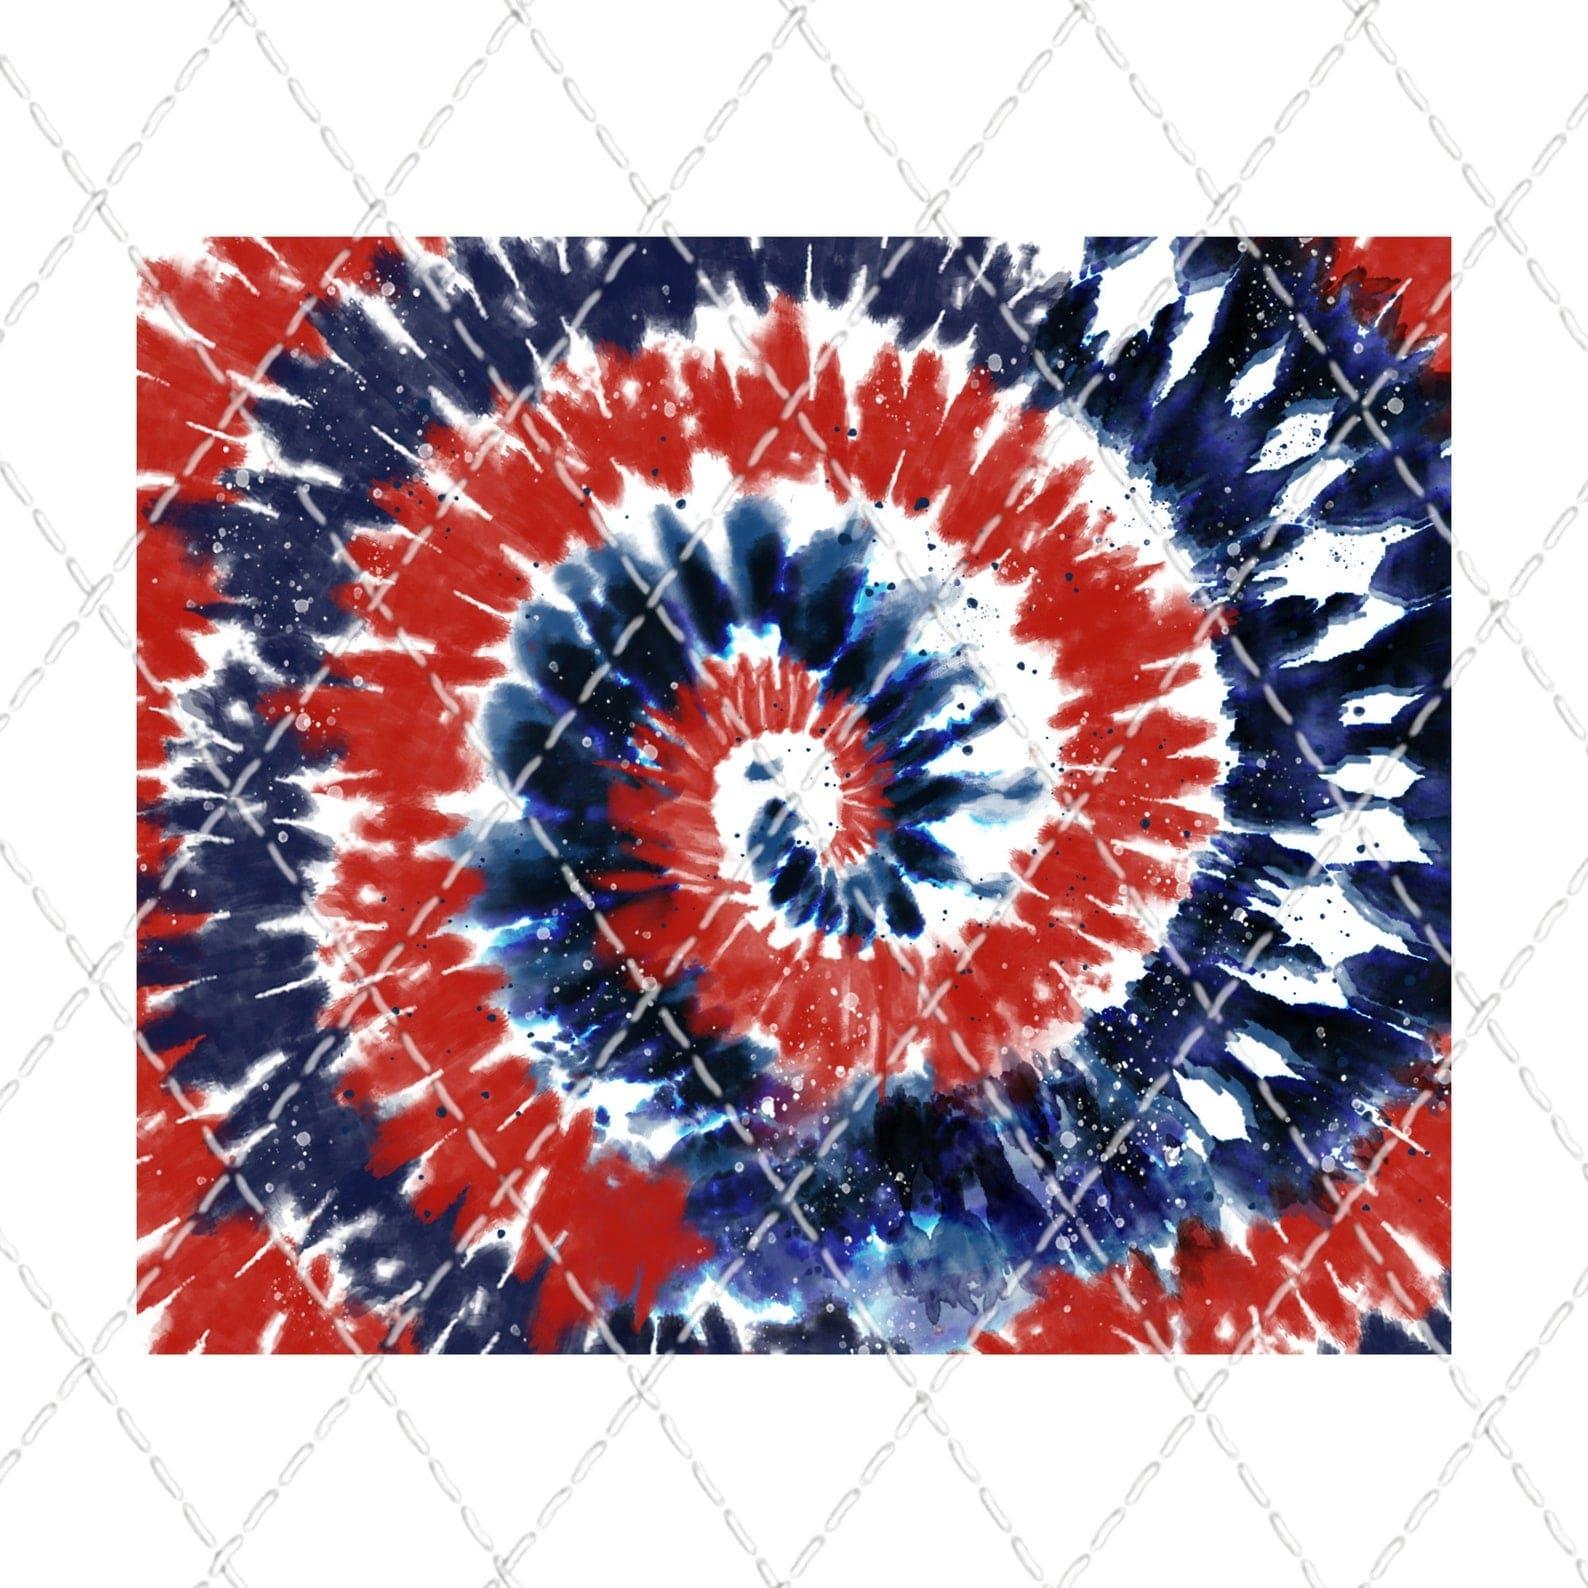 Patriotic Red, White & Blue Tie Dye 30 oz. Straight Skinny Tumbler by SSC Designs - Scrapbook Supply Companies